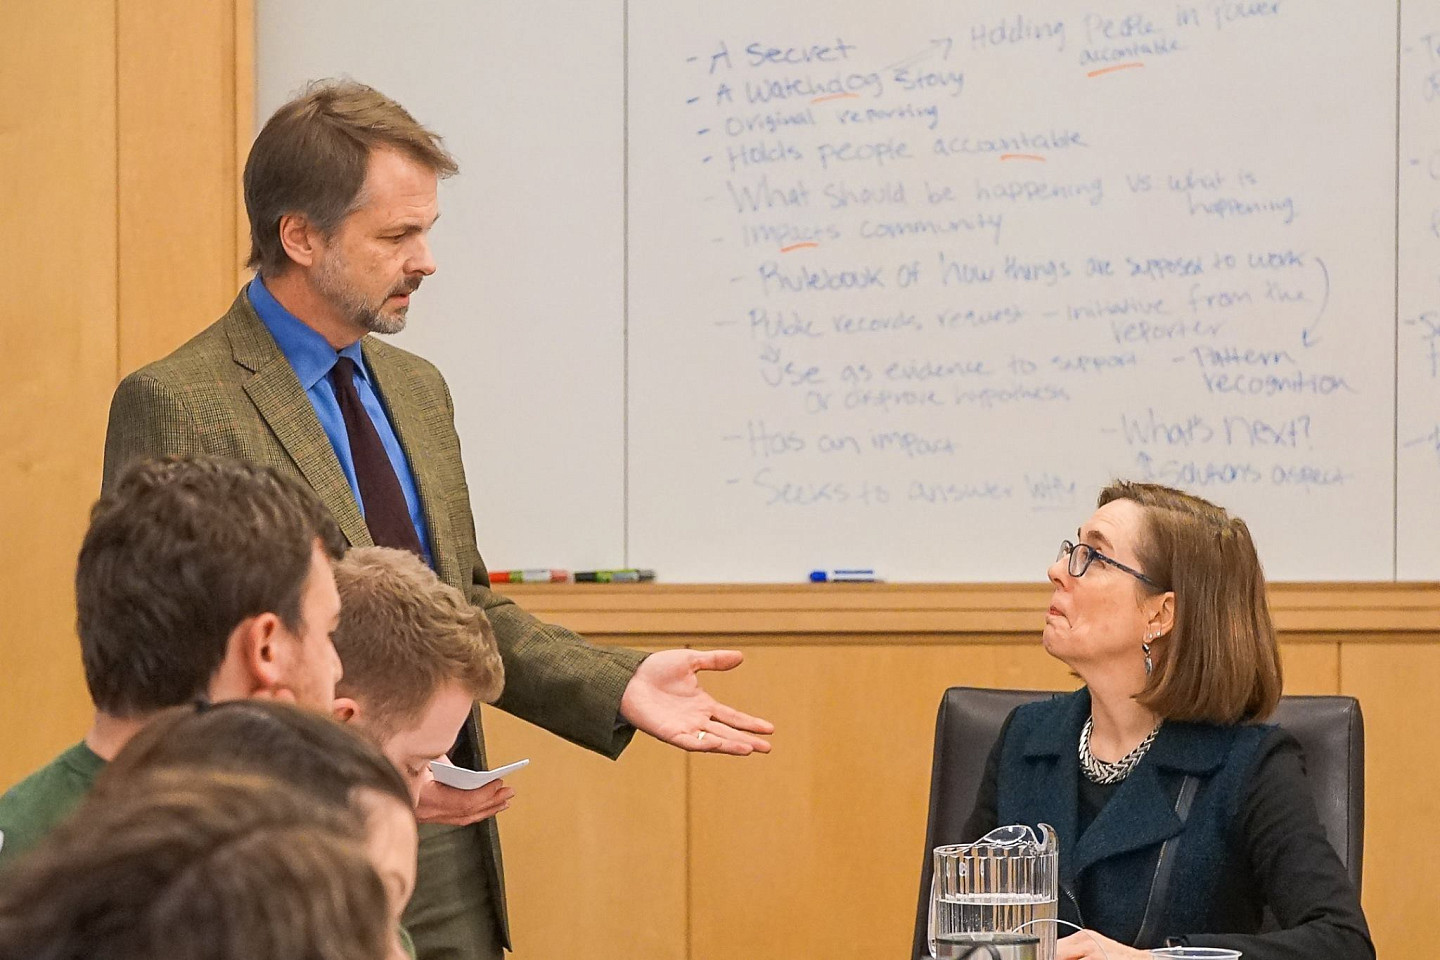 Oregon Governor Kate Brown visited Brent Walth's investigative reporting course on Jan. 16, 2018. In the session, students questioned the governor about Oregon's public records laws and transparency in government. Photo courtesy of Catalyst Journalism Project, a program co-founded by Brent Walth.